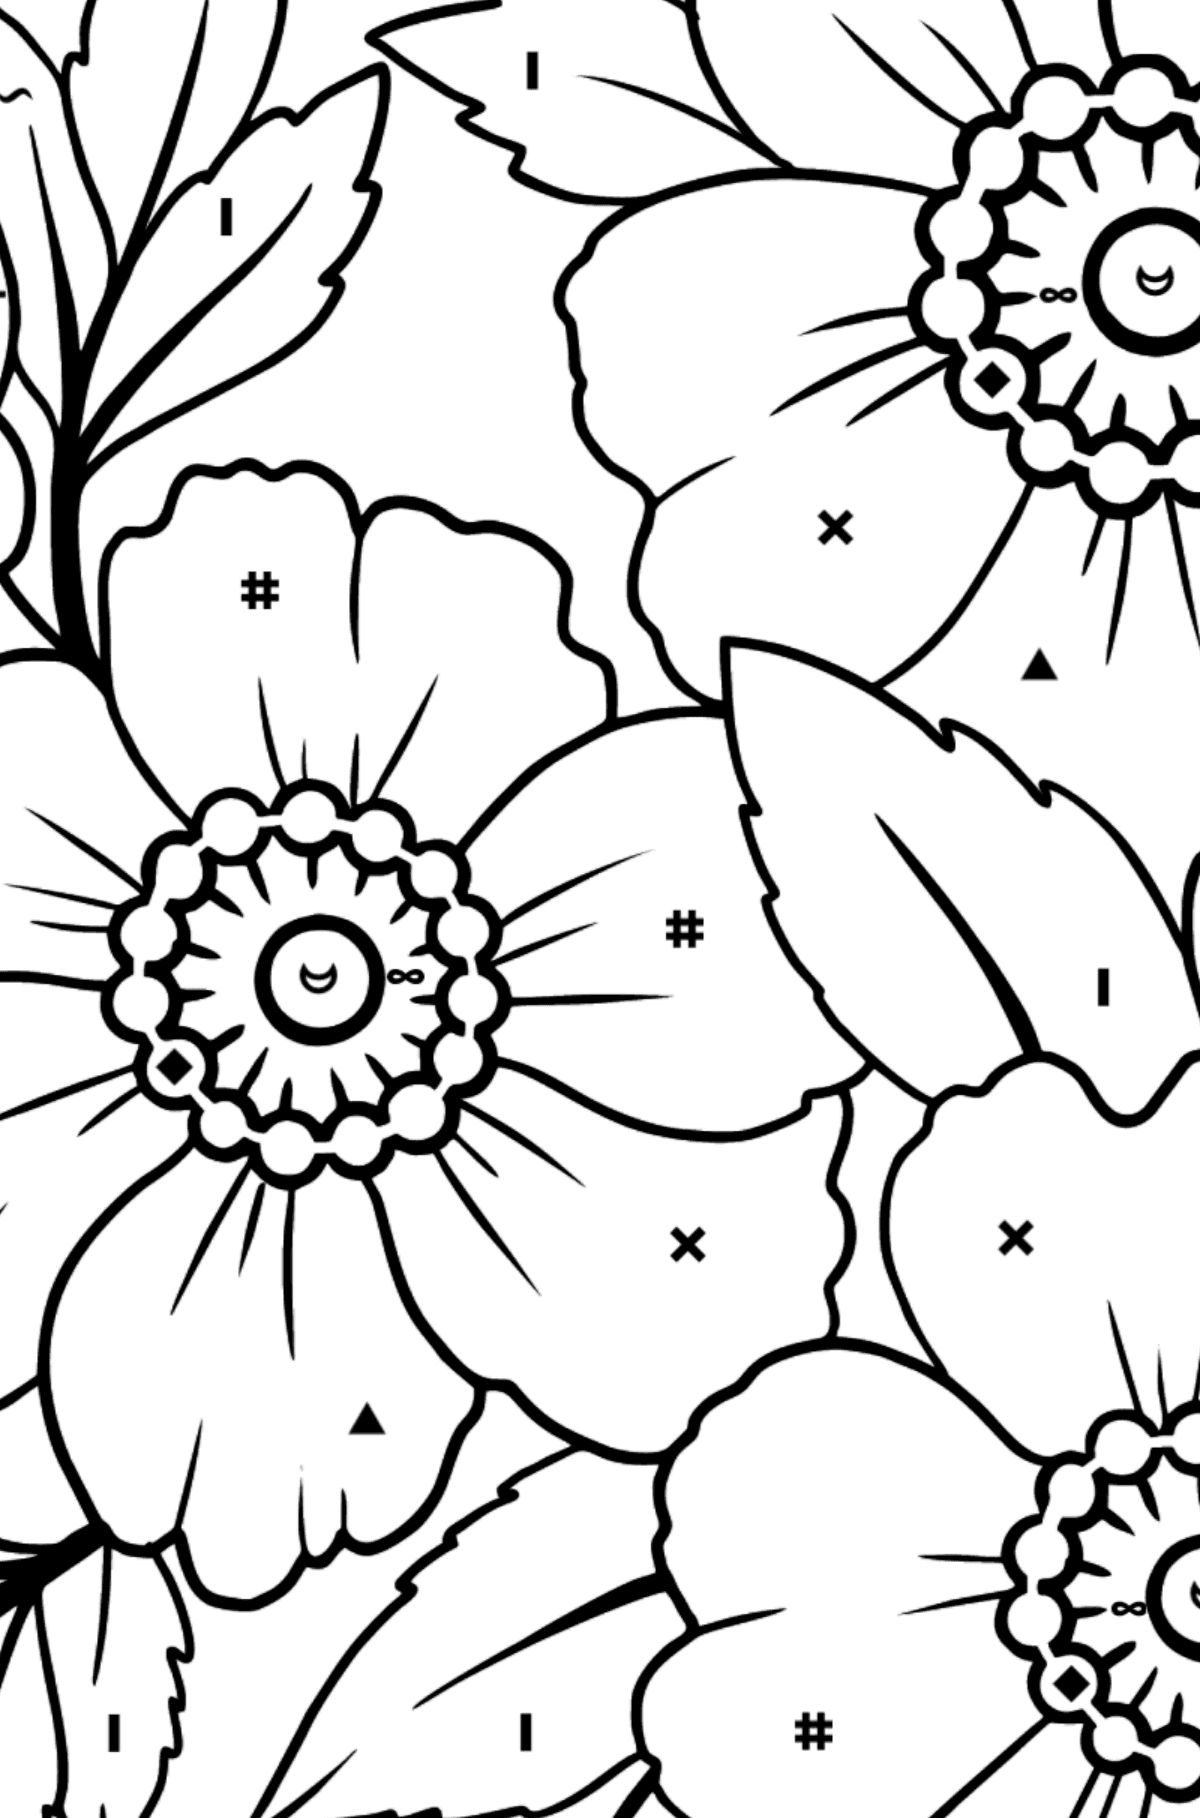 Flower Coloring Page (A4) - A Japanese Anemone with Pink Petals - Coloring by Symbols for Kids